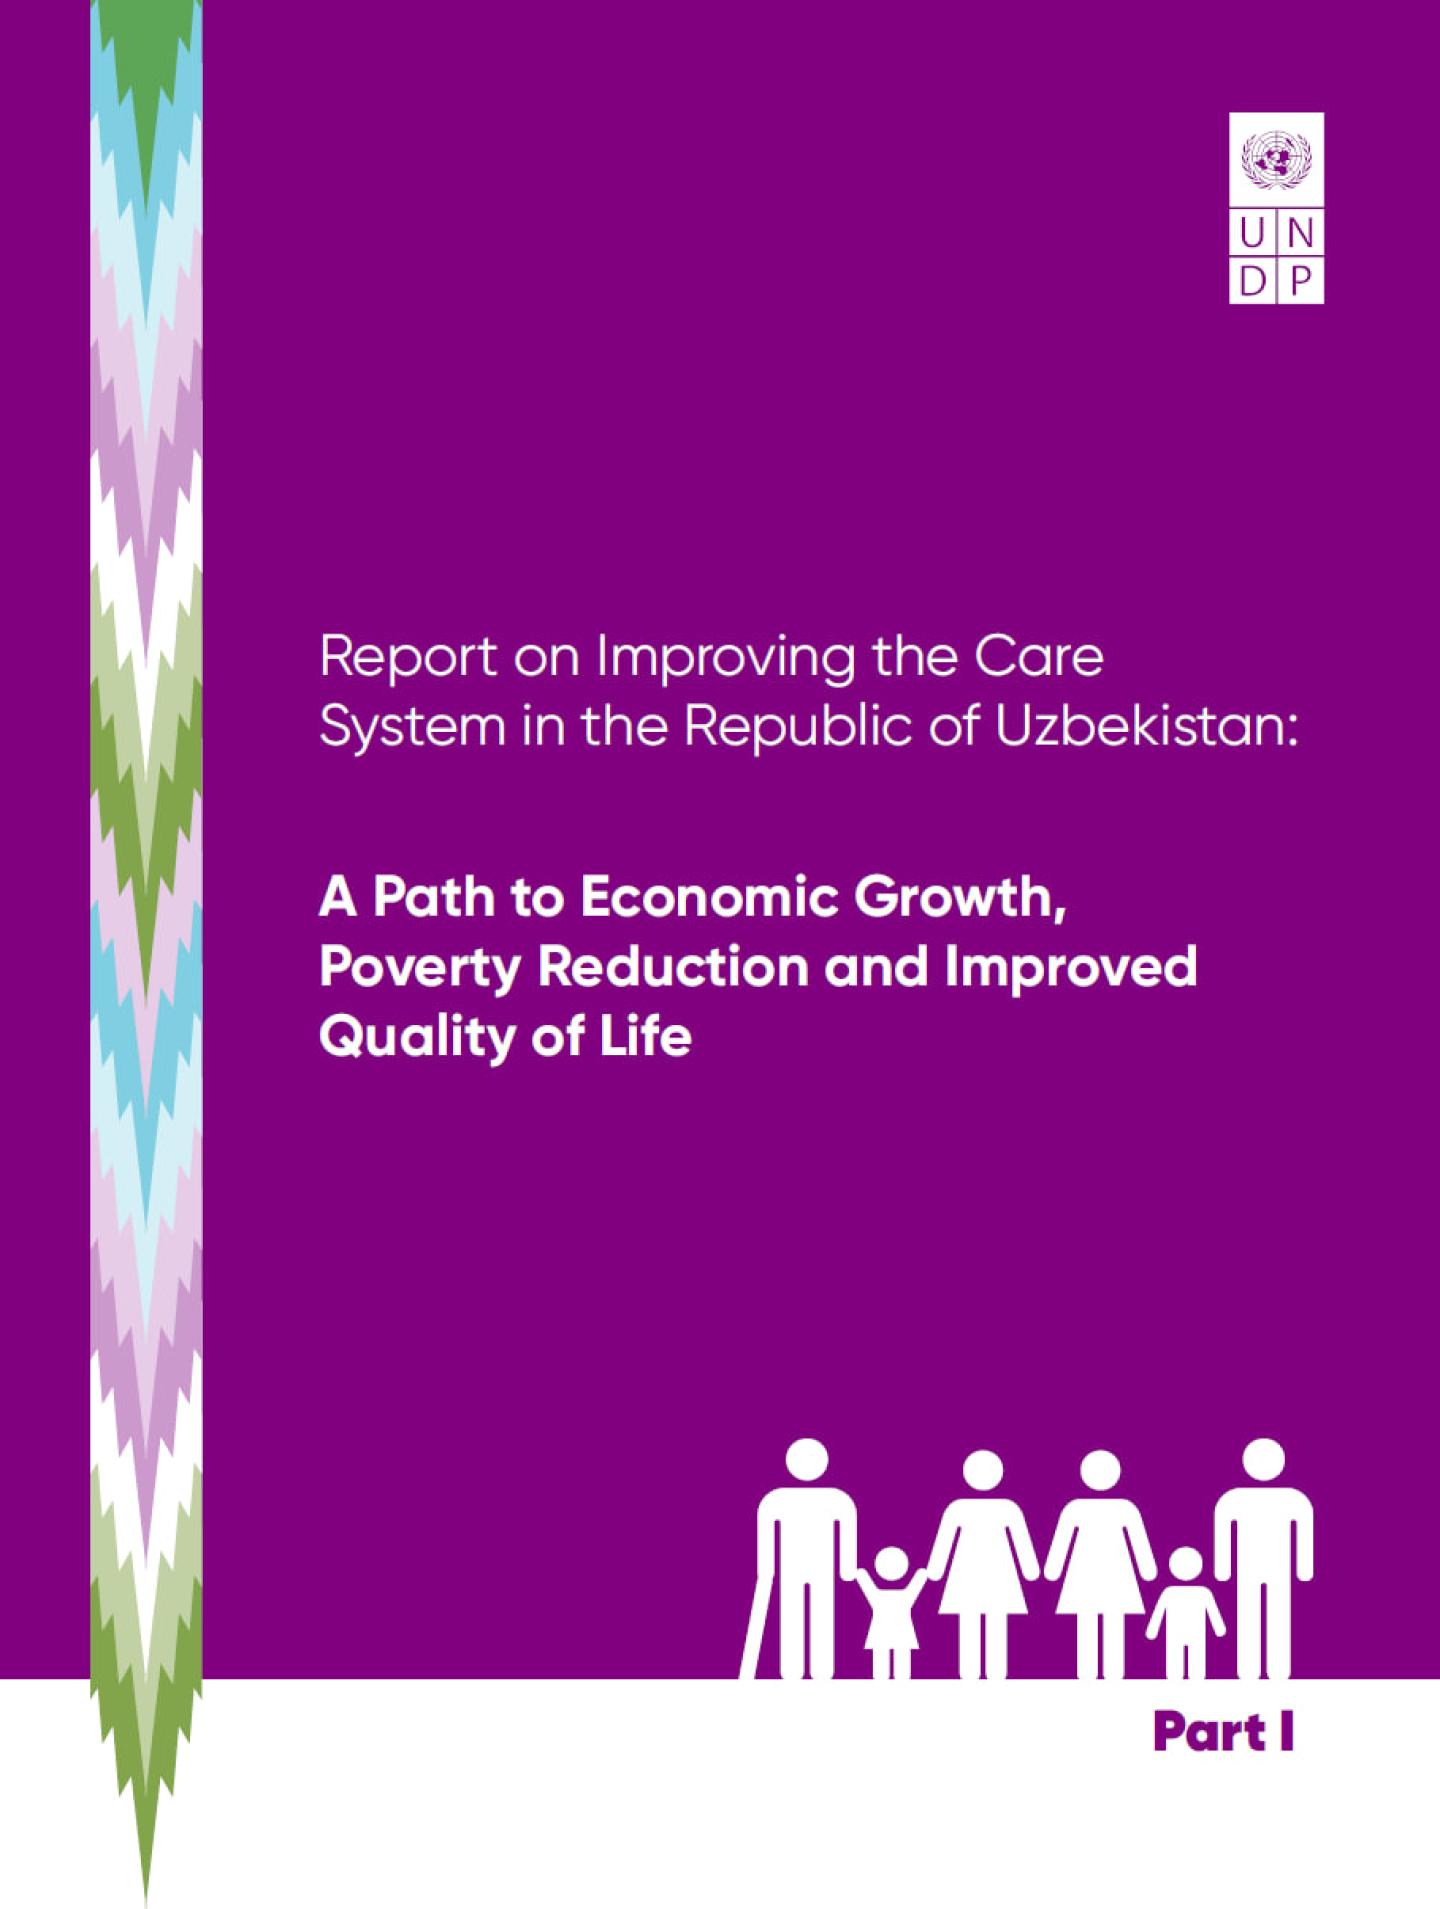 Report on Improving the Care System in Uzbekistan